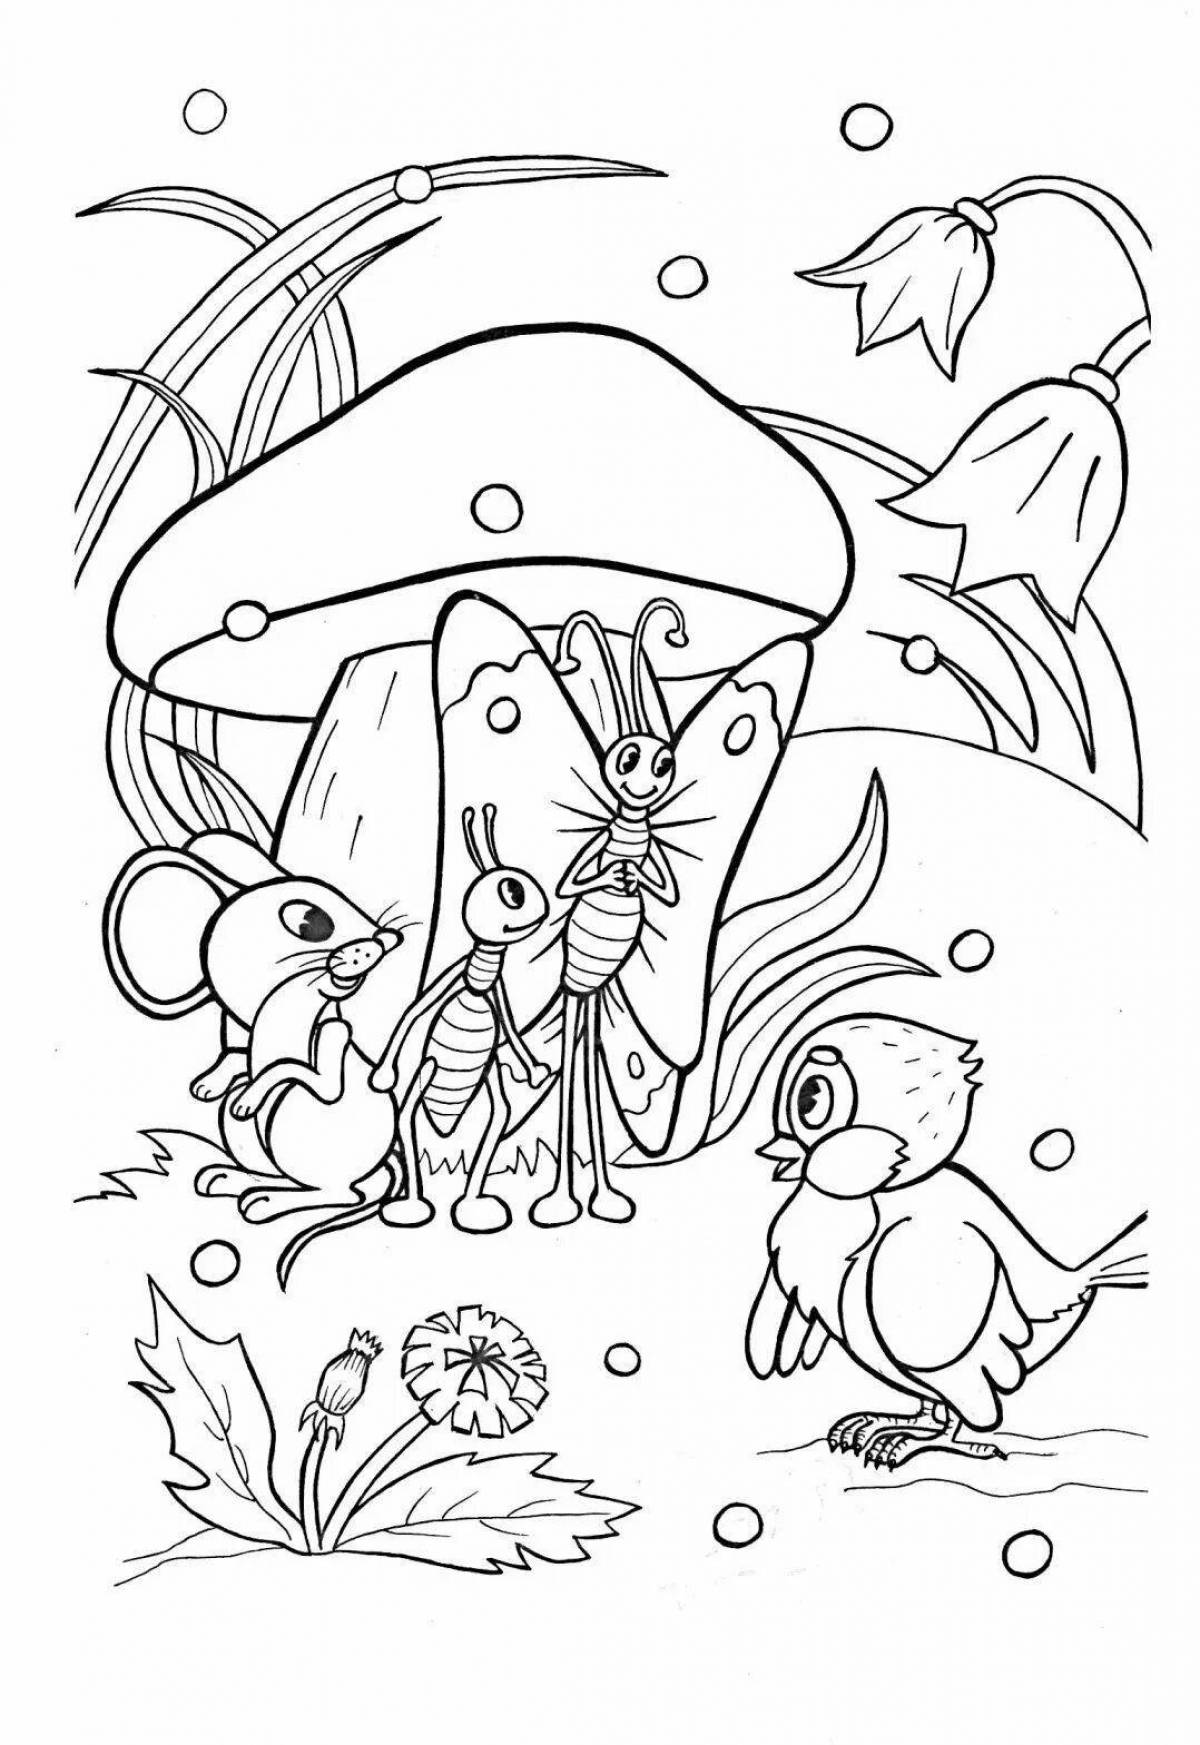 Amazing fairy tale coloring book for preschoolers